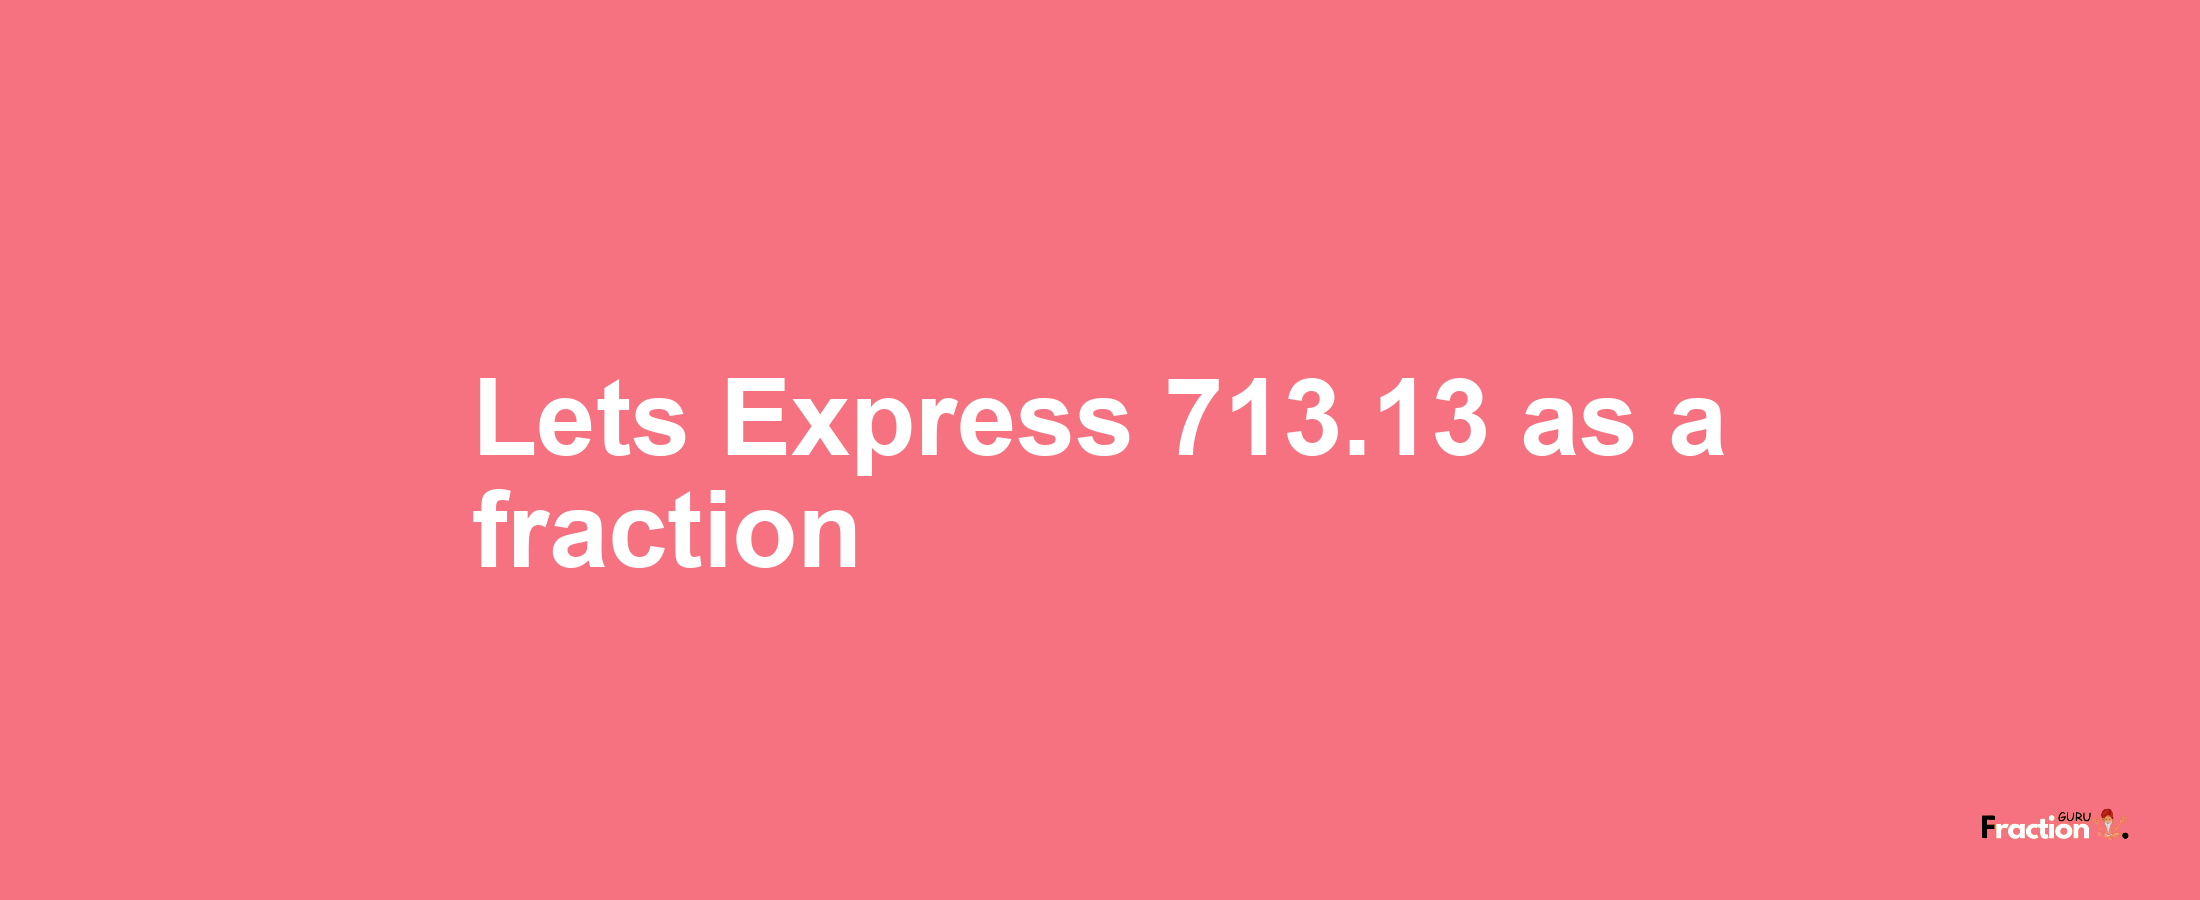 Lets Express 713.13 as afraction